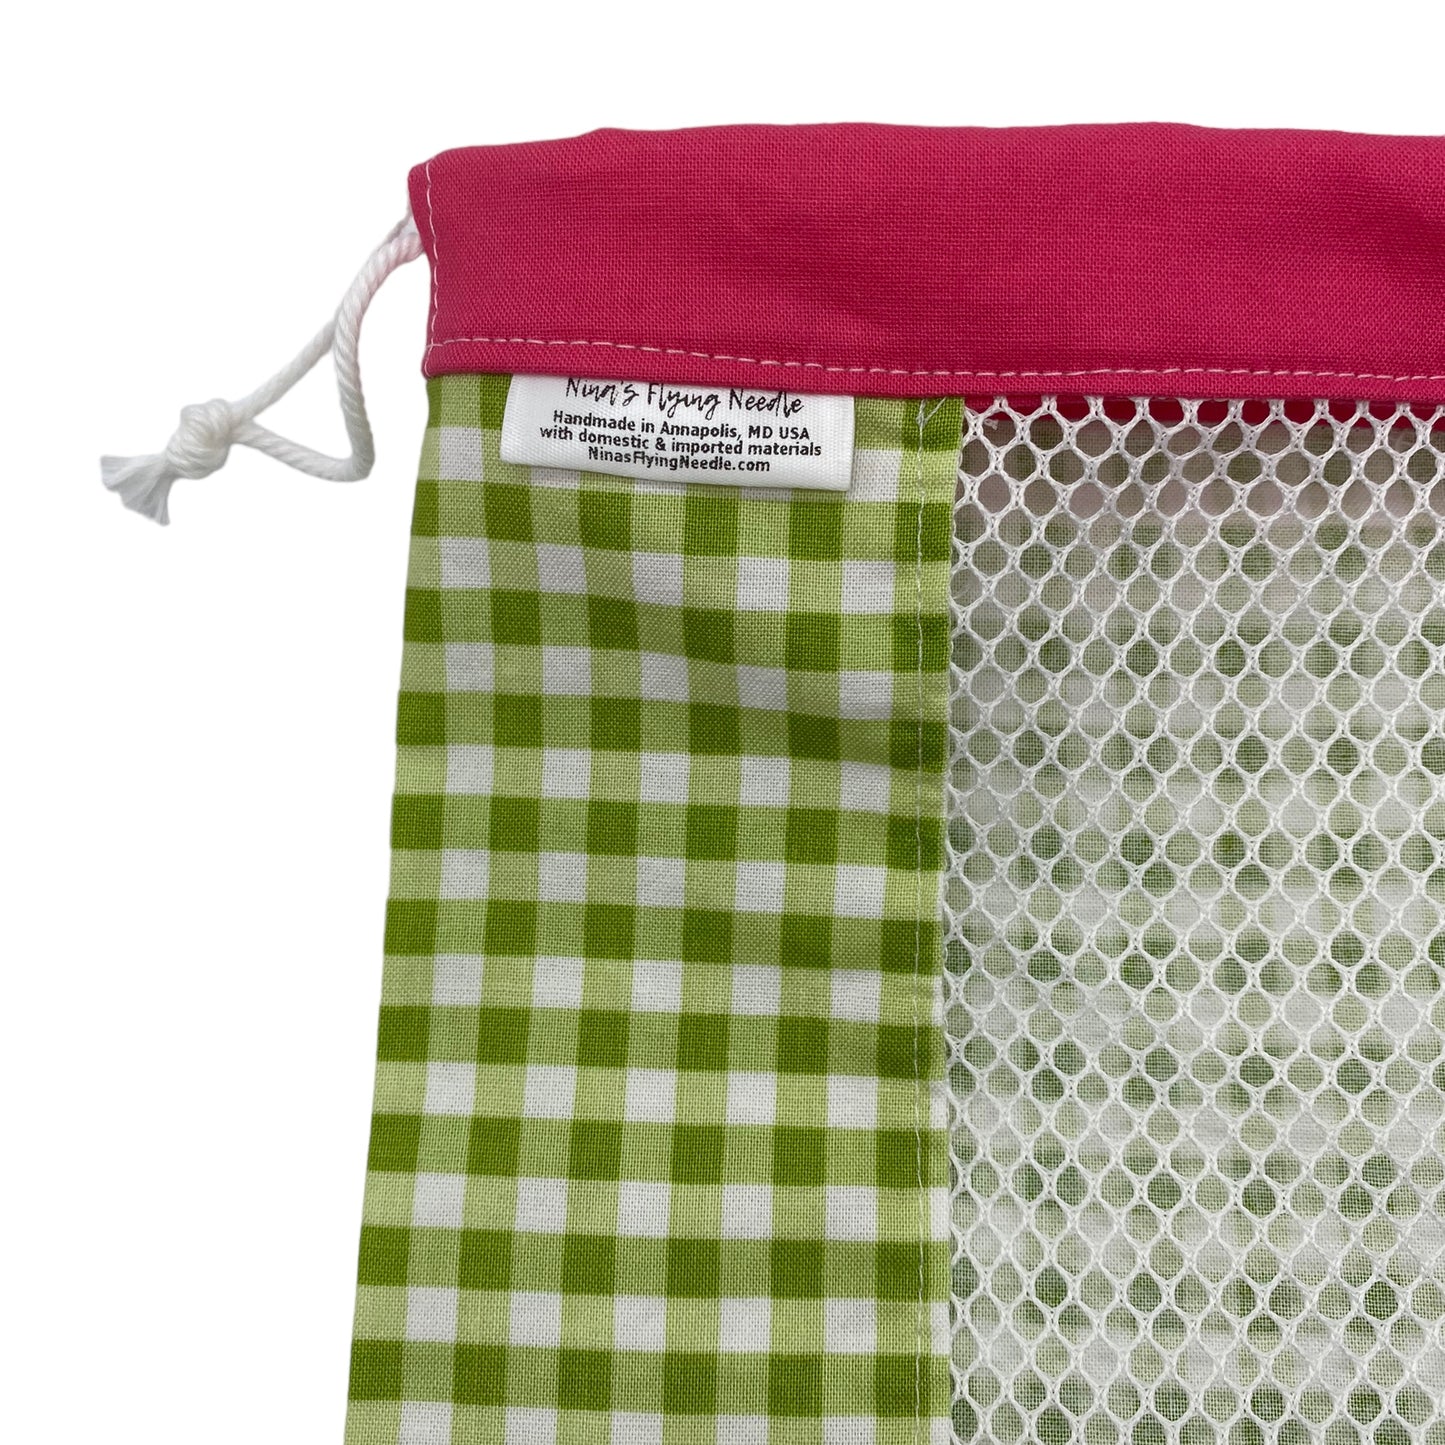 Small Produce Bag Gingham Green